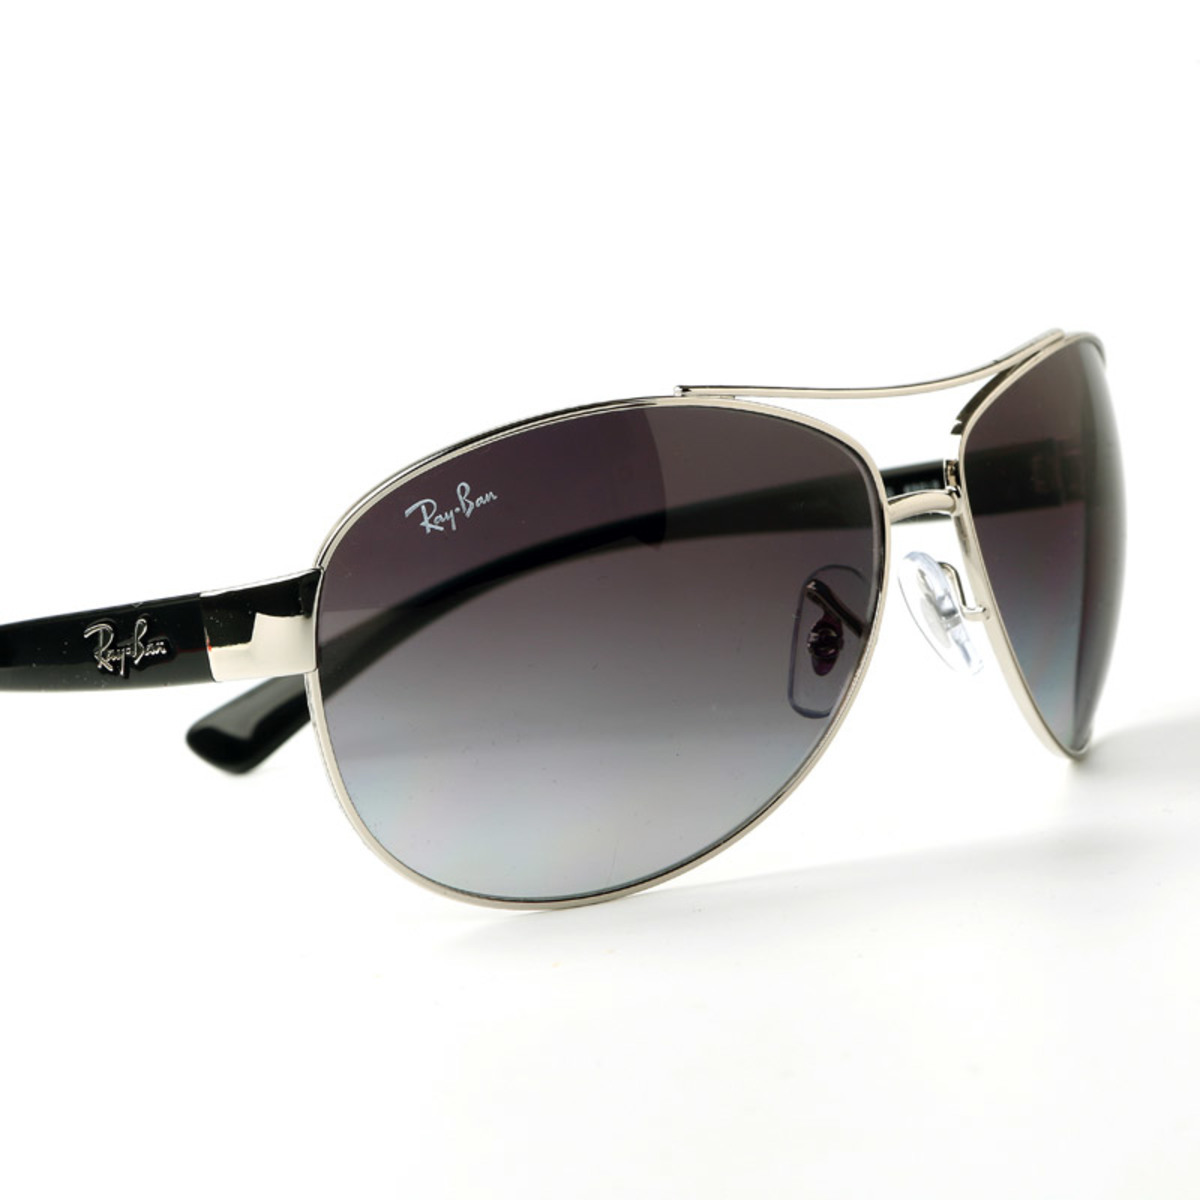 Ray-Ban Aviator Silver & Black Sunglasses with Grey Lenses, RB3386 003/8G